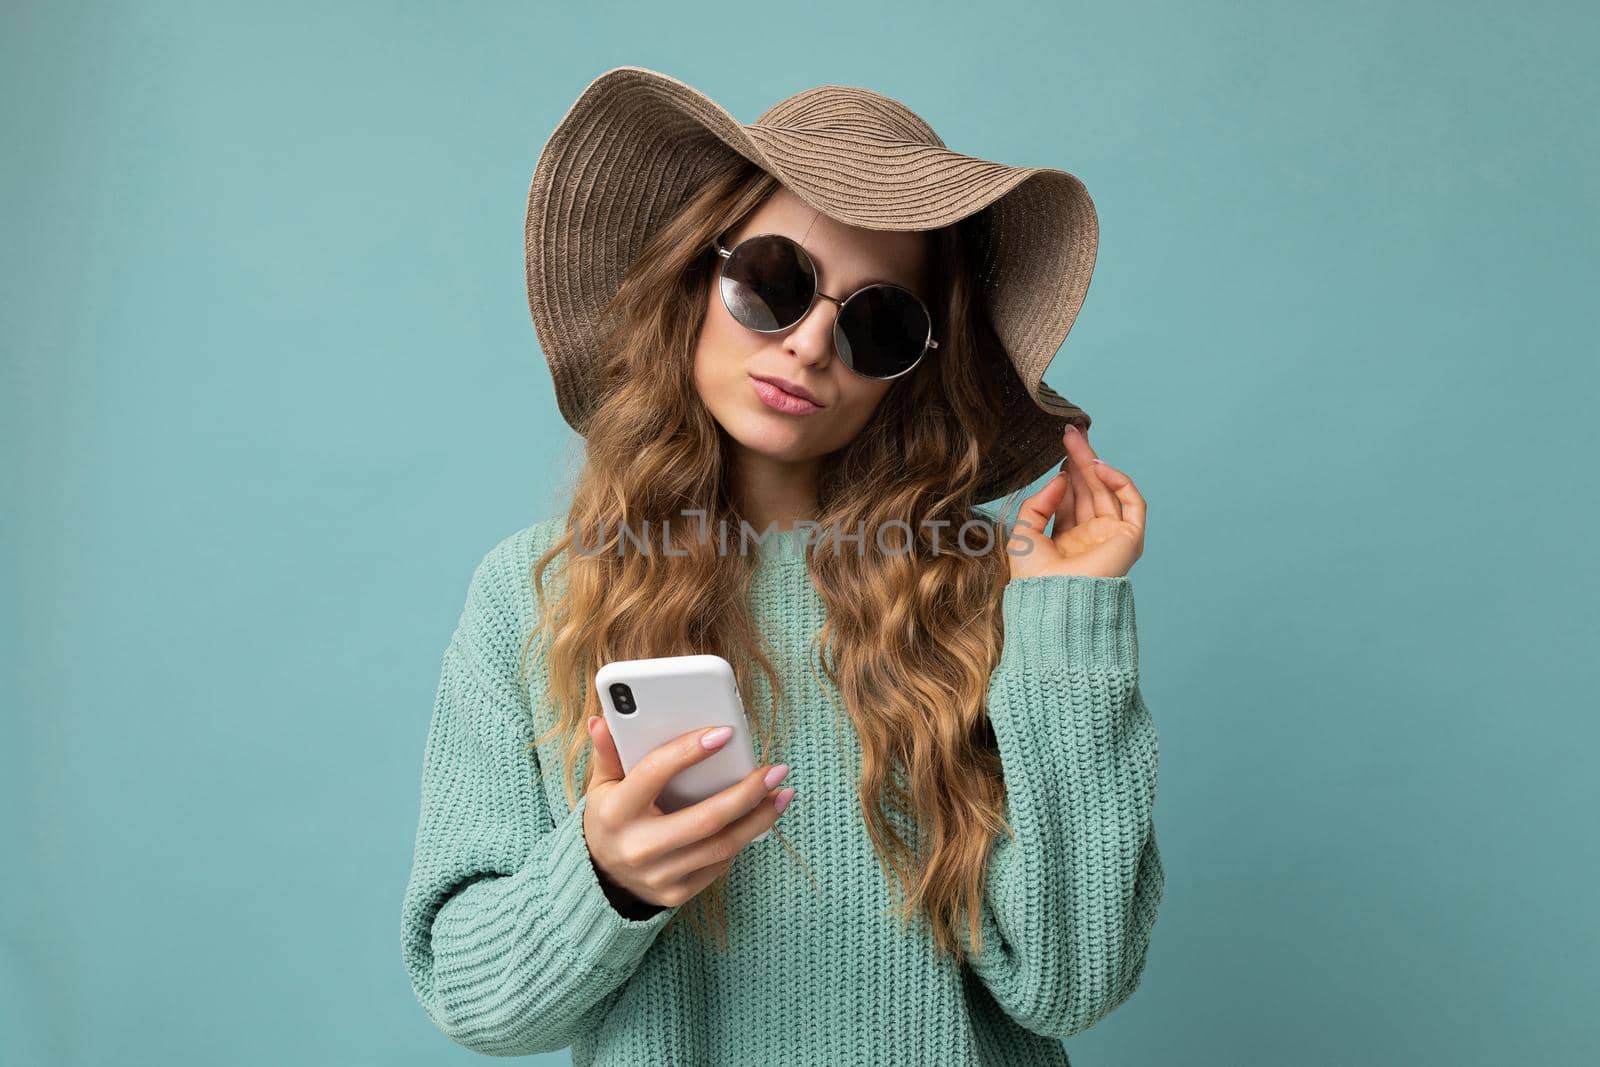 Attractive young blonde woman wearing blue sweater hat and sunglasses standing isolated over blue background surfing on the internet via phone looking at gadjet.